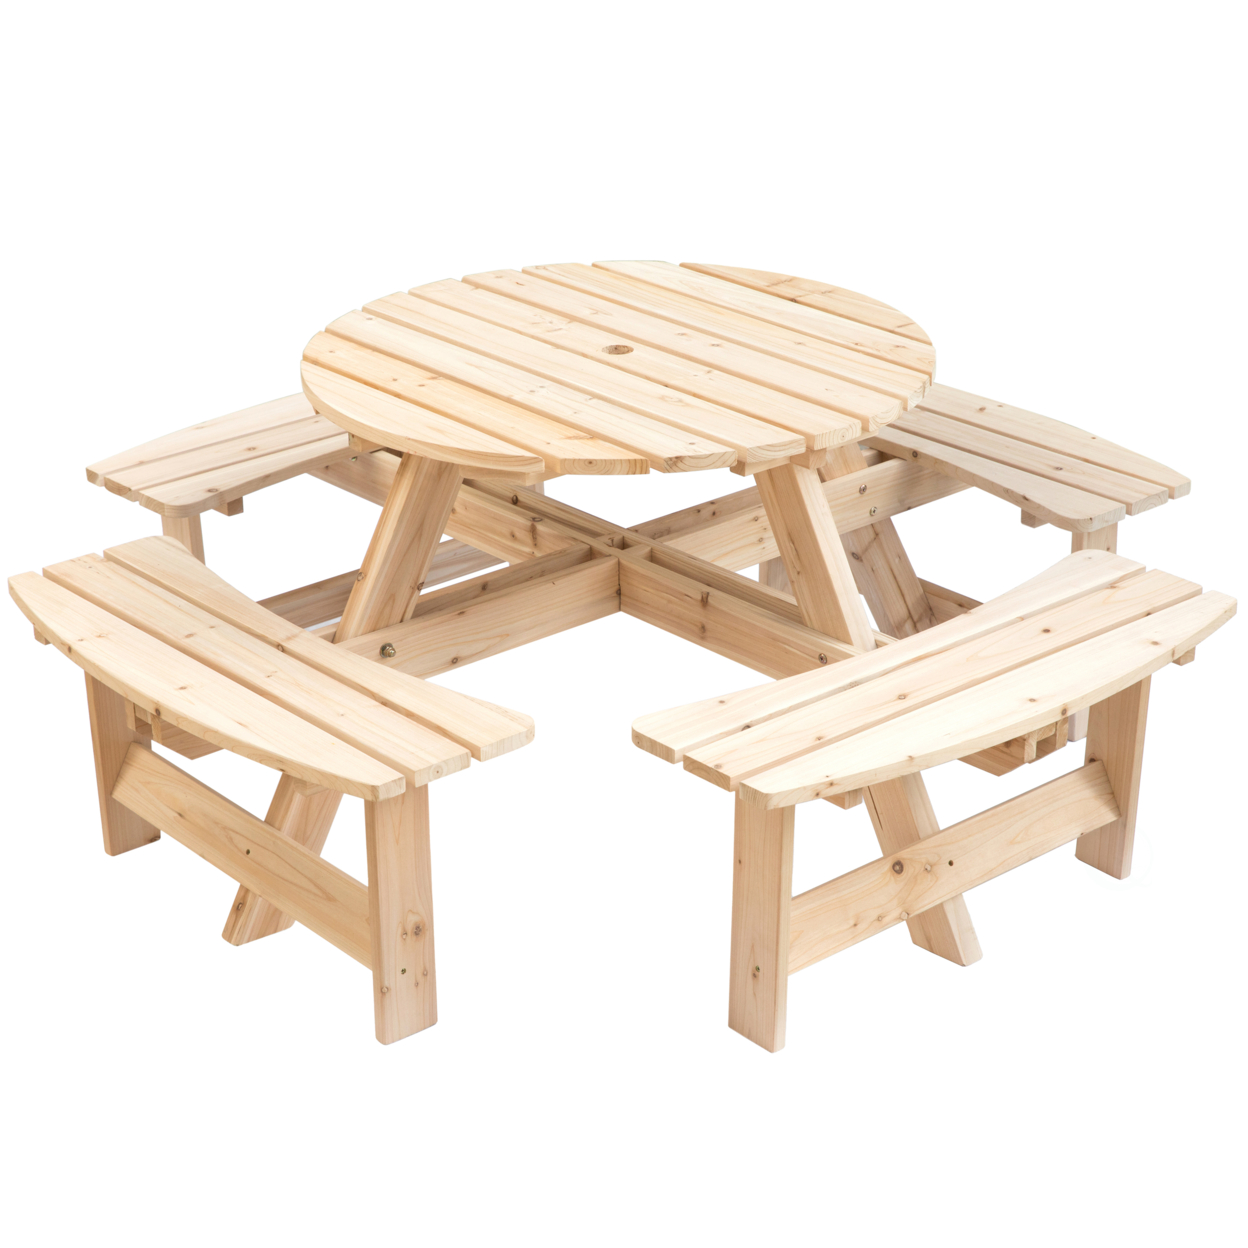 Wooden Outdoor Patio Garden Round Picnic Table with Bench, 8 Person - image 4 of 10